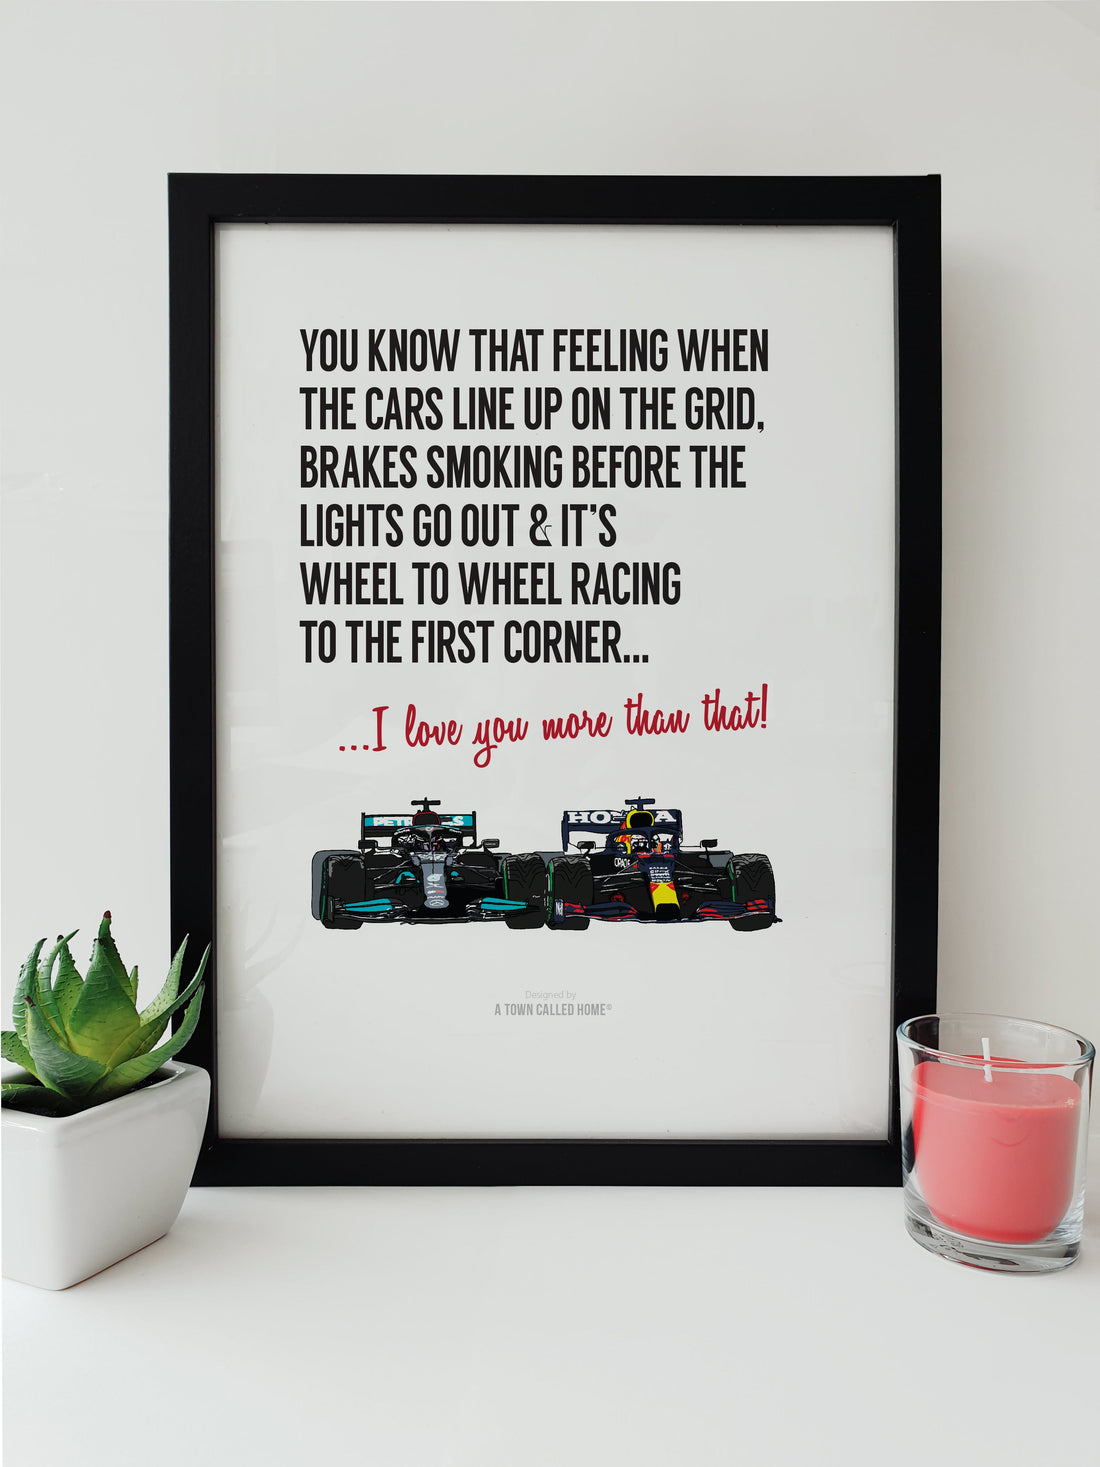  formula 1 max verstappen and lewis hamilton themed poster, print, wall art & illustration. Perfect gift for a racing sports car fan. Designed by a town called home